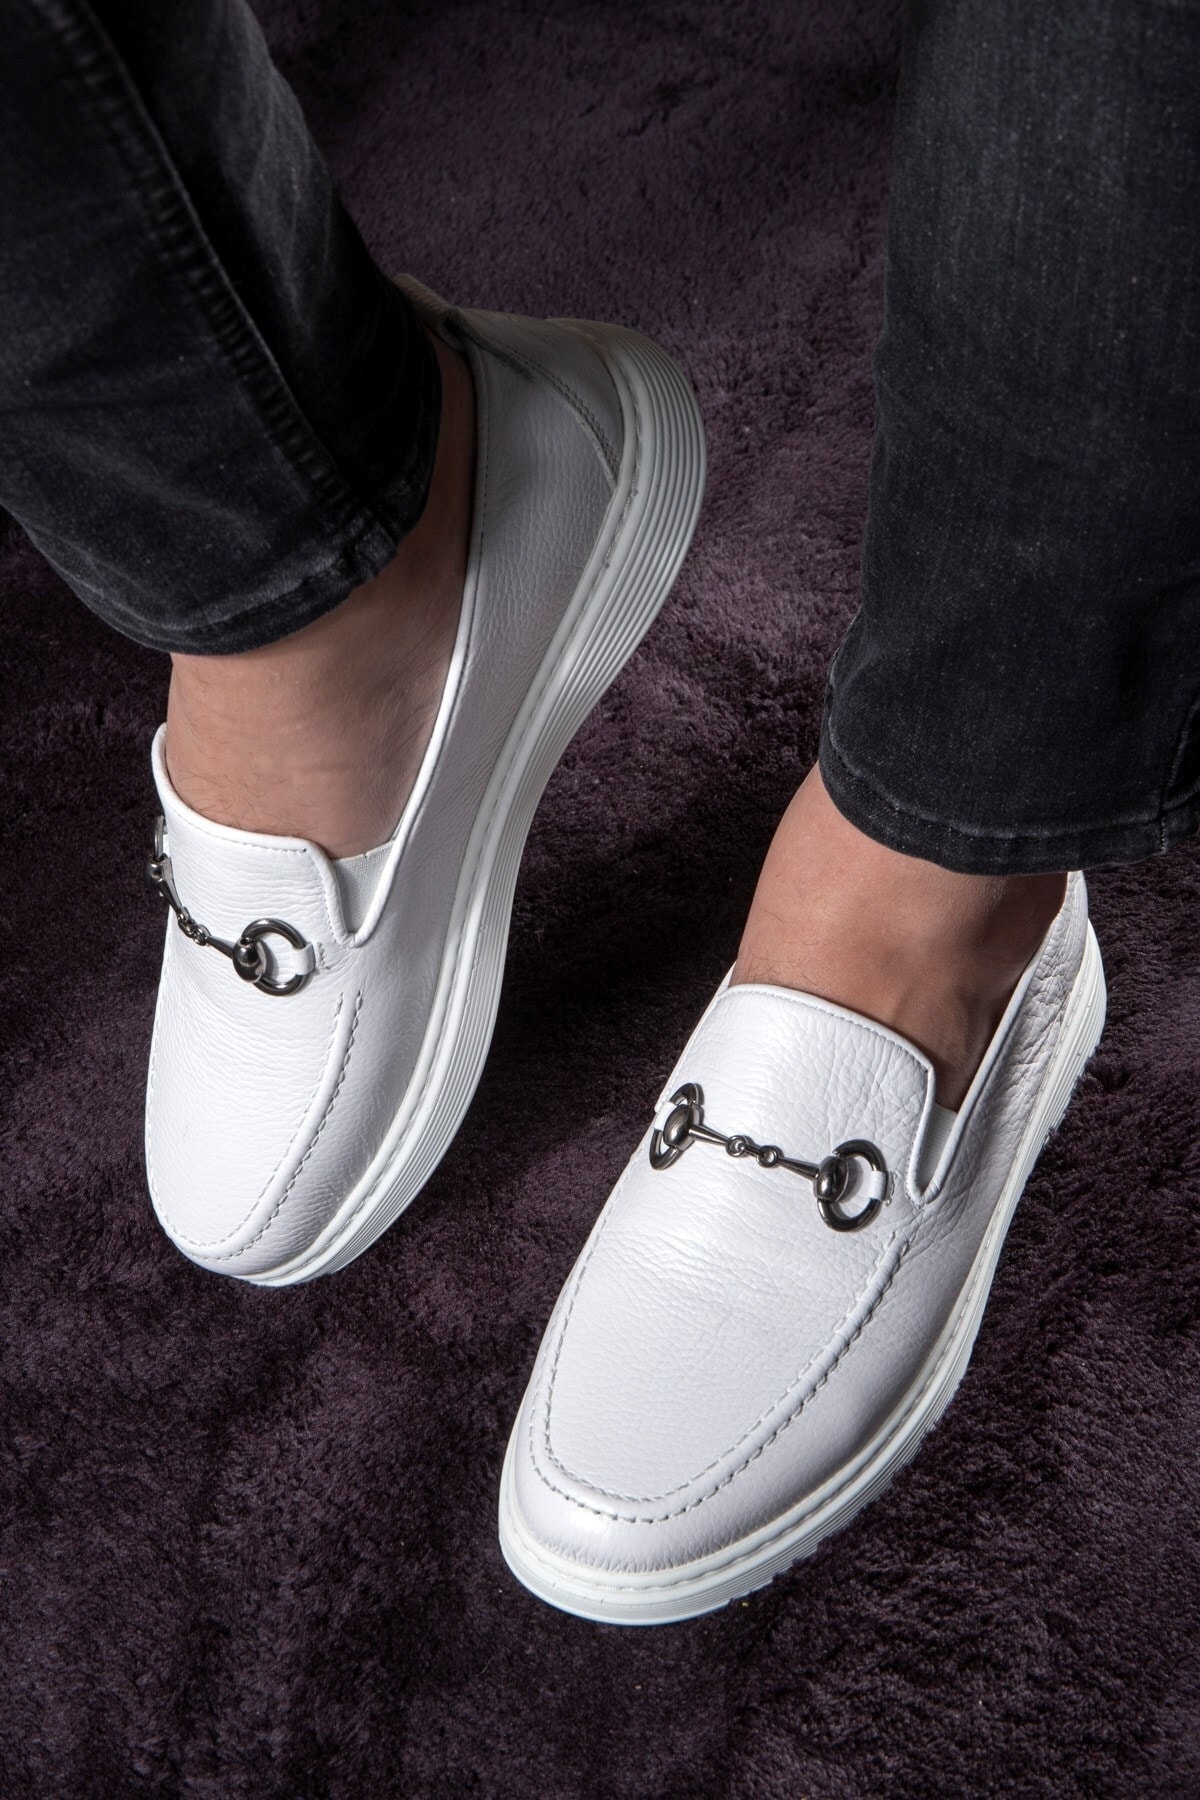 Levně Ducavelli Anchor Genuine Leather Men's Casual Shoes, Loafers, Light Shoes, Summer Shoes.